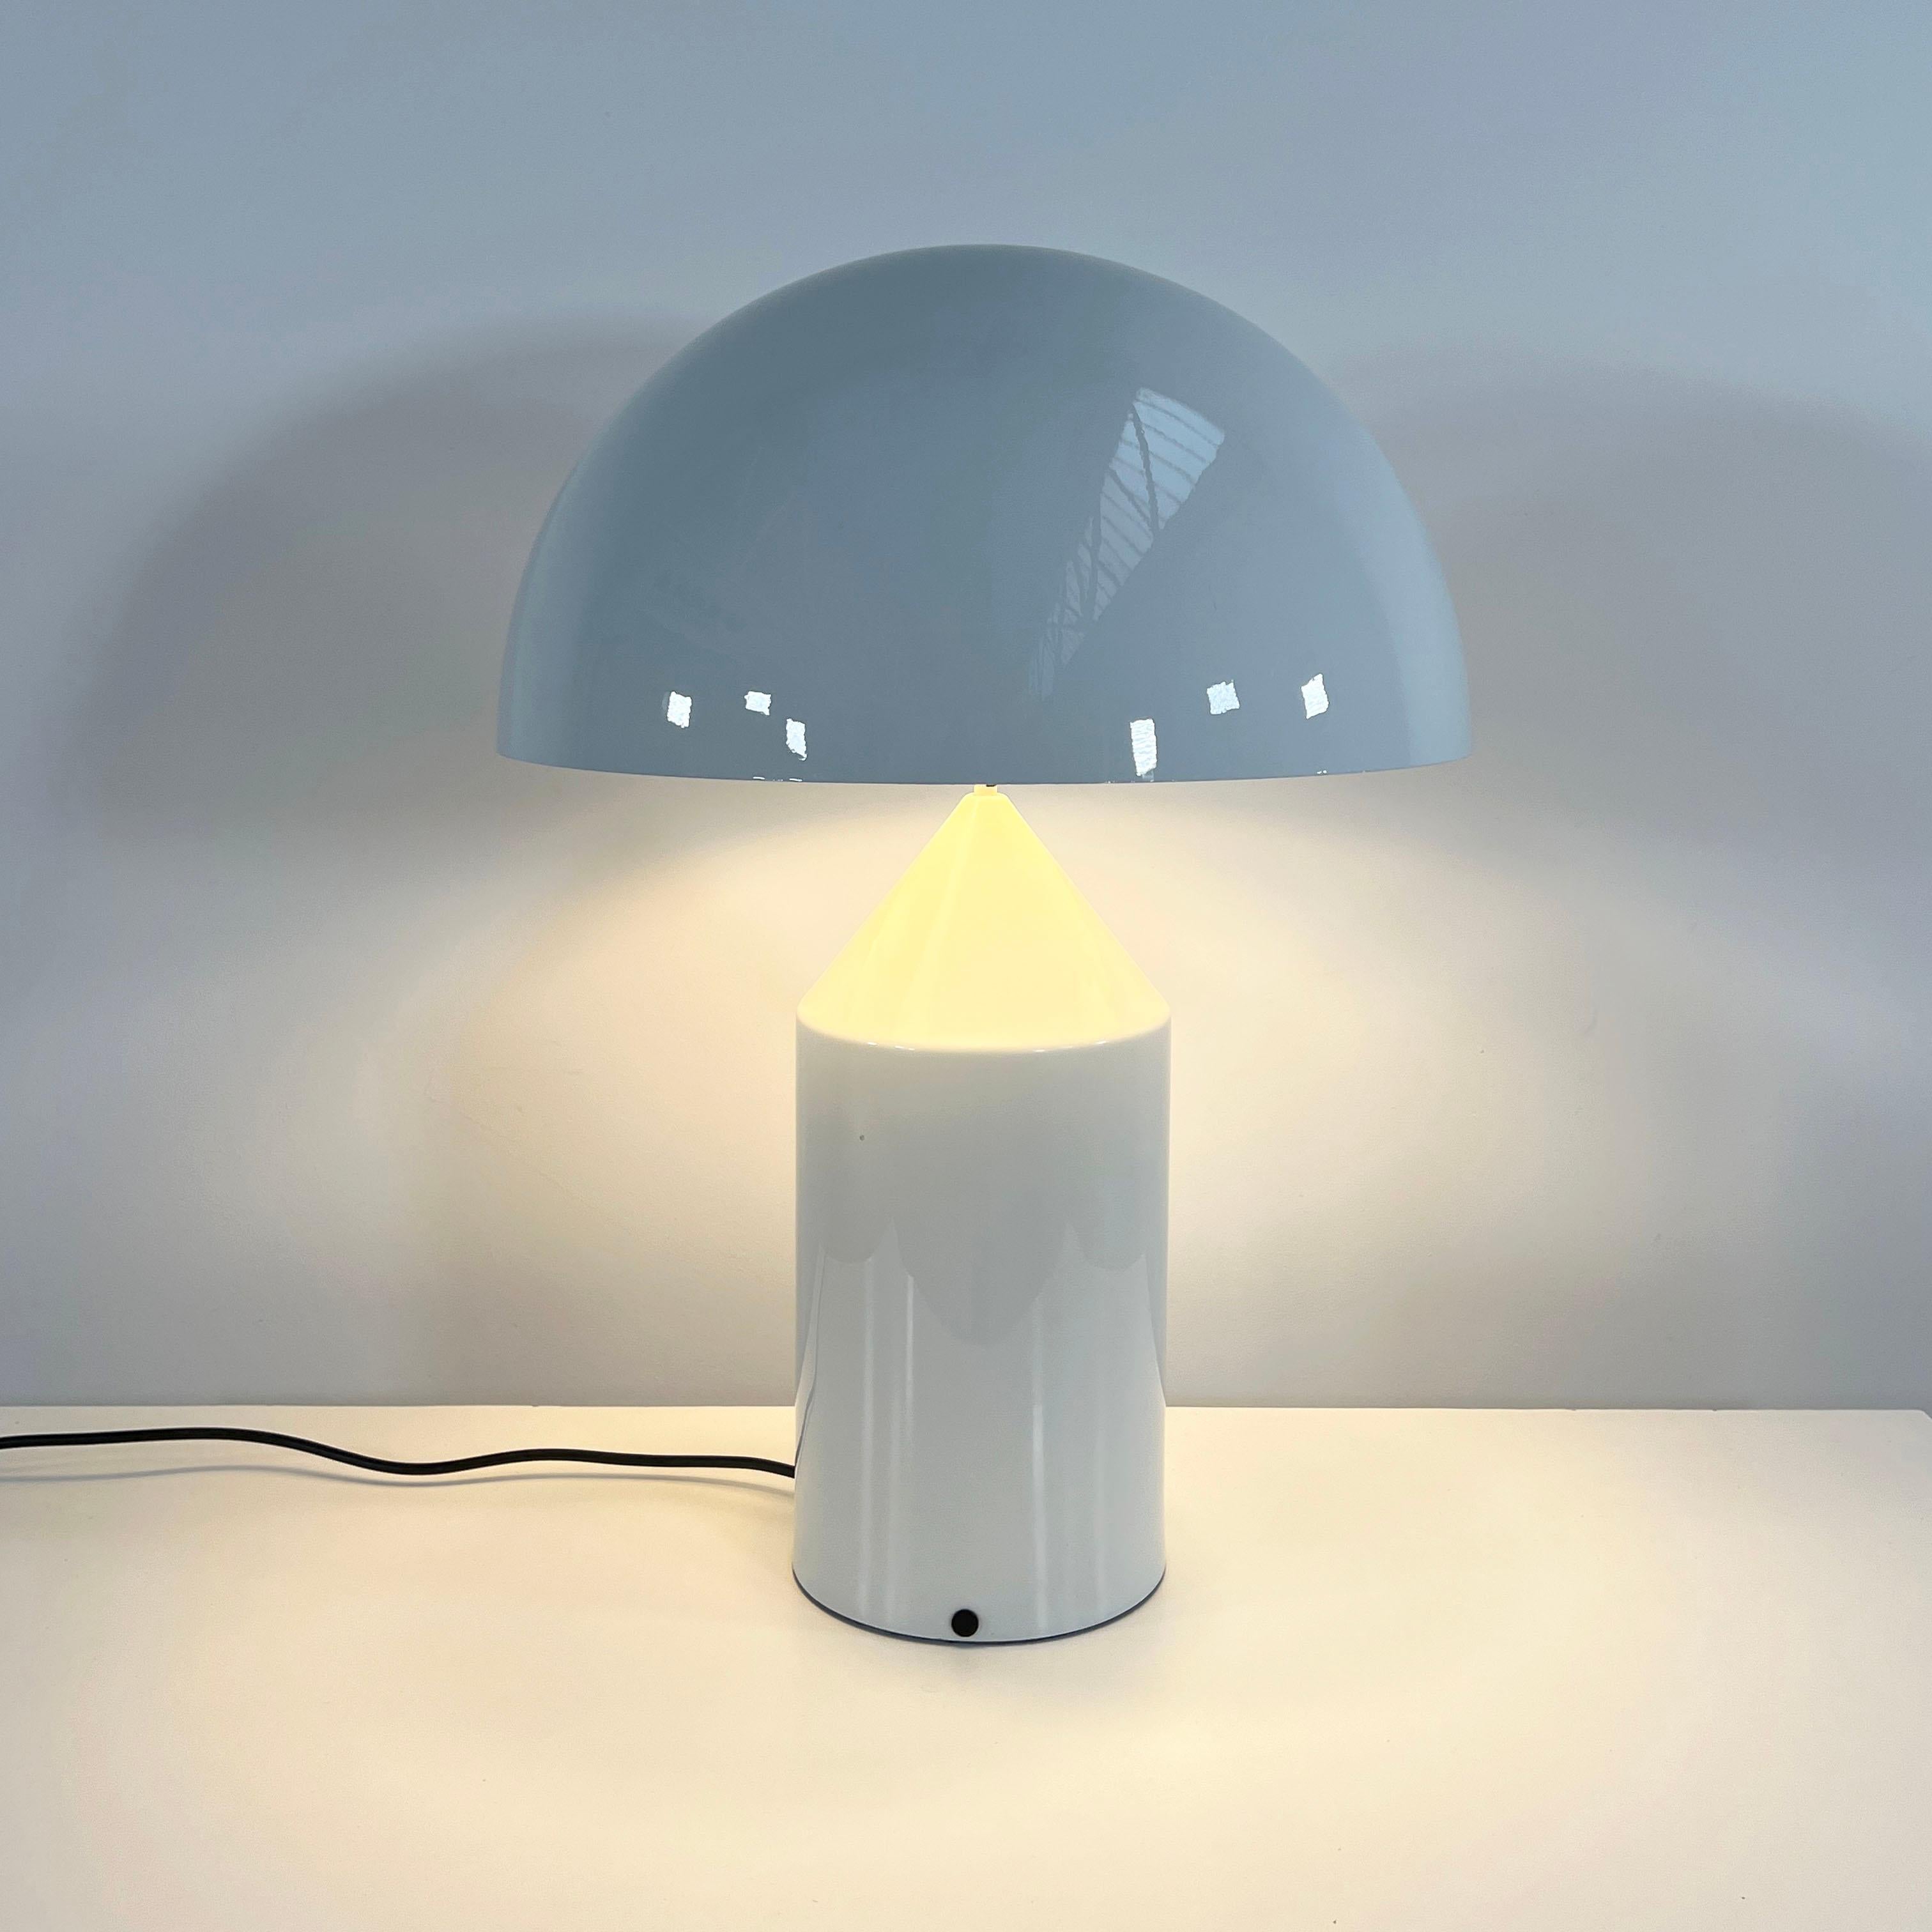 Designer - Vico Magistretti
Producer - Oluce
Model - Large Atollo Table Lamp
Design Period - Sixties
Measurements - Width 50 cm x Depth 50 cm x Height 70 cm
Materials - Metal
Color - White 
Electrical Properties - European Plug (up to 240V) /